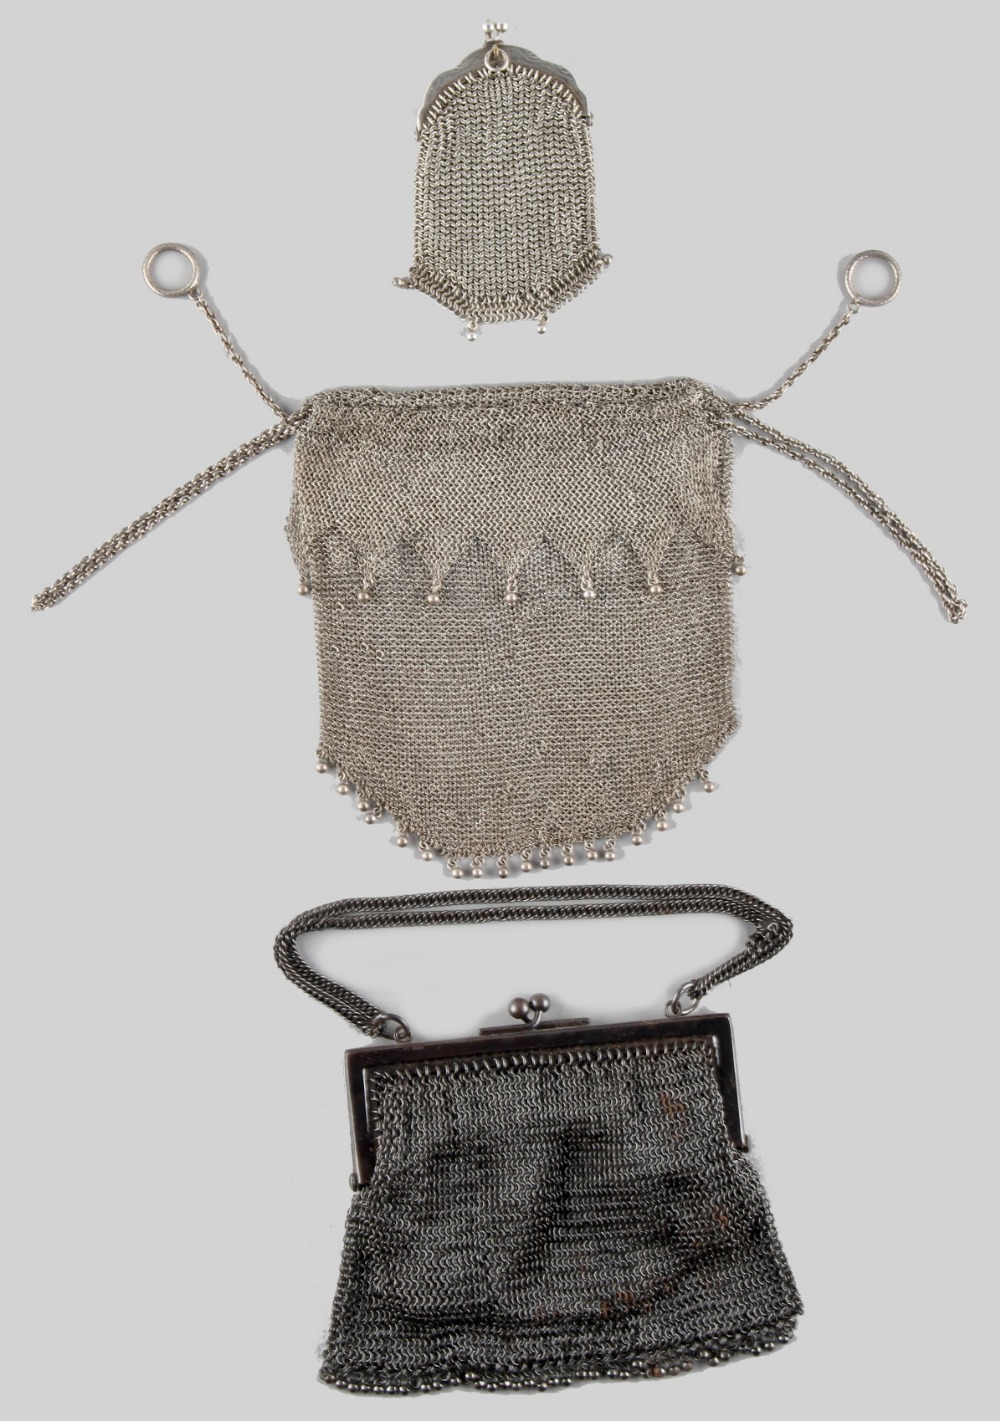 A private collection of handbags from a deceased estate - a white metal mesh purse with drawstring